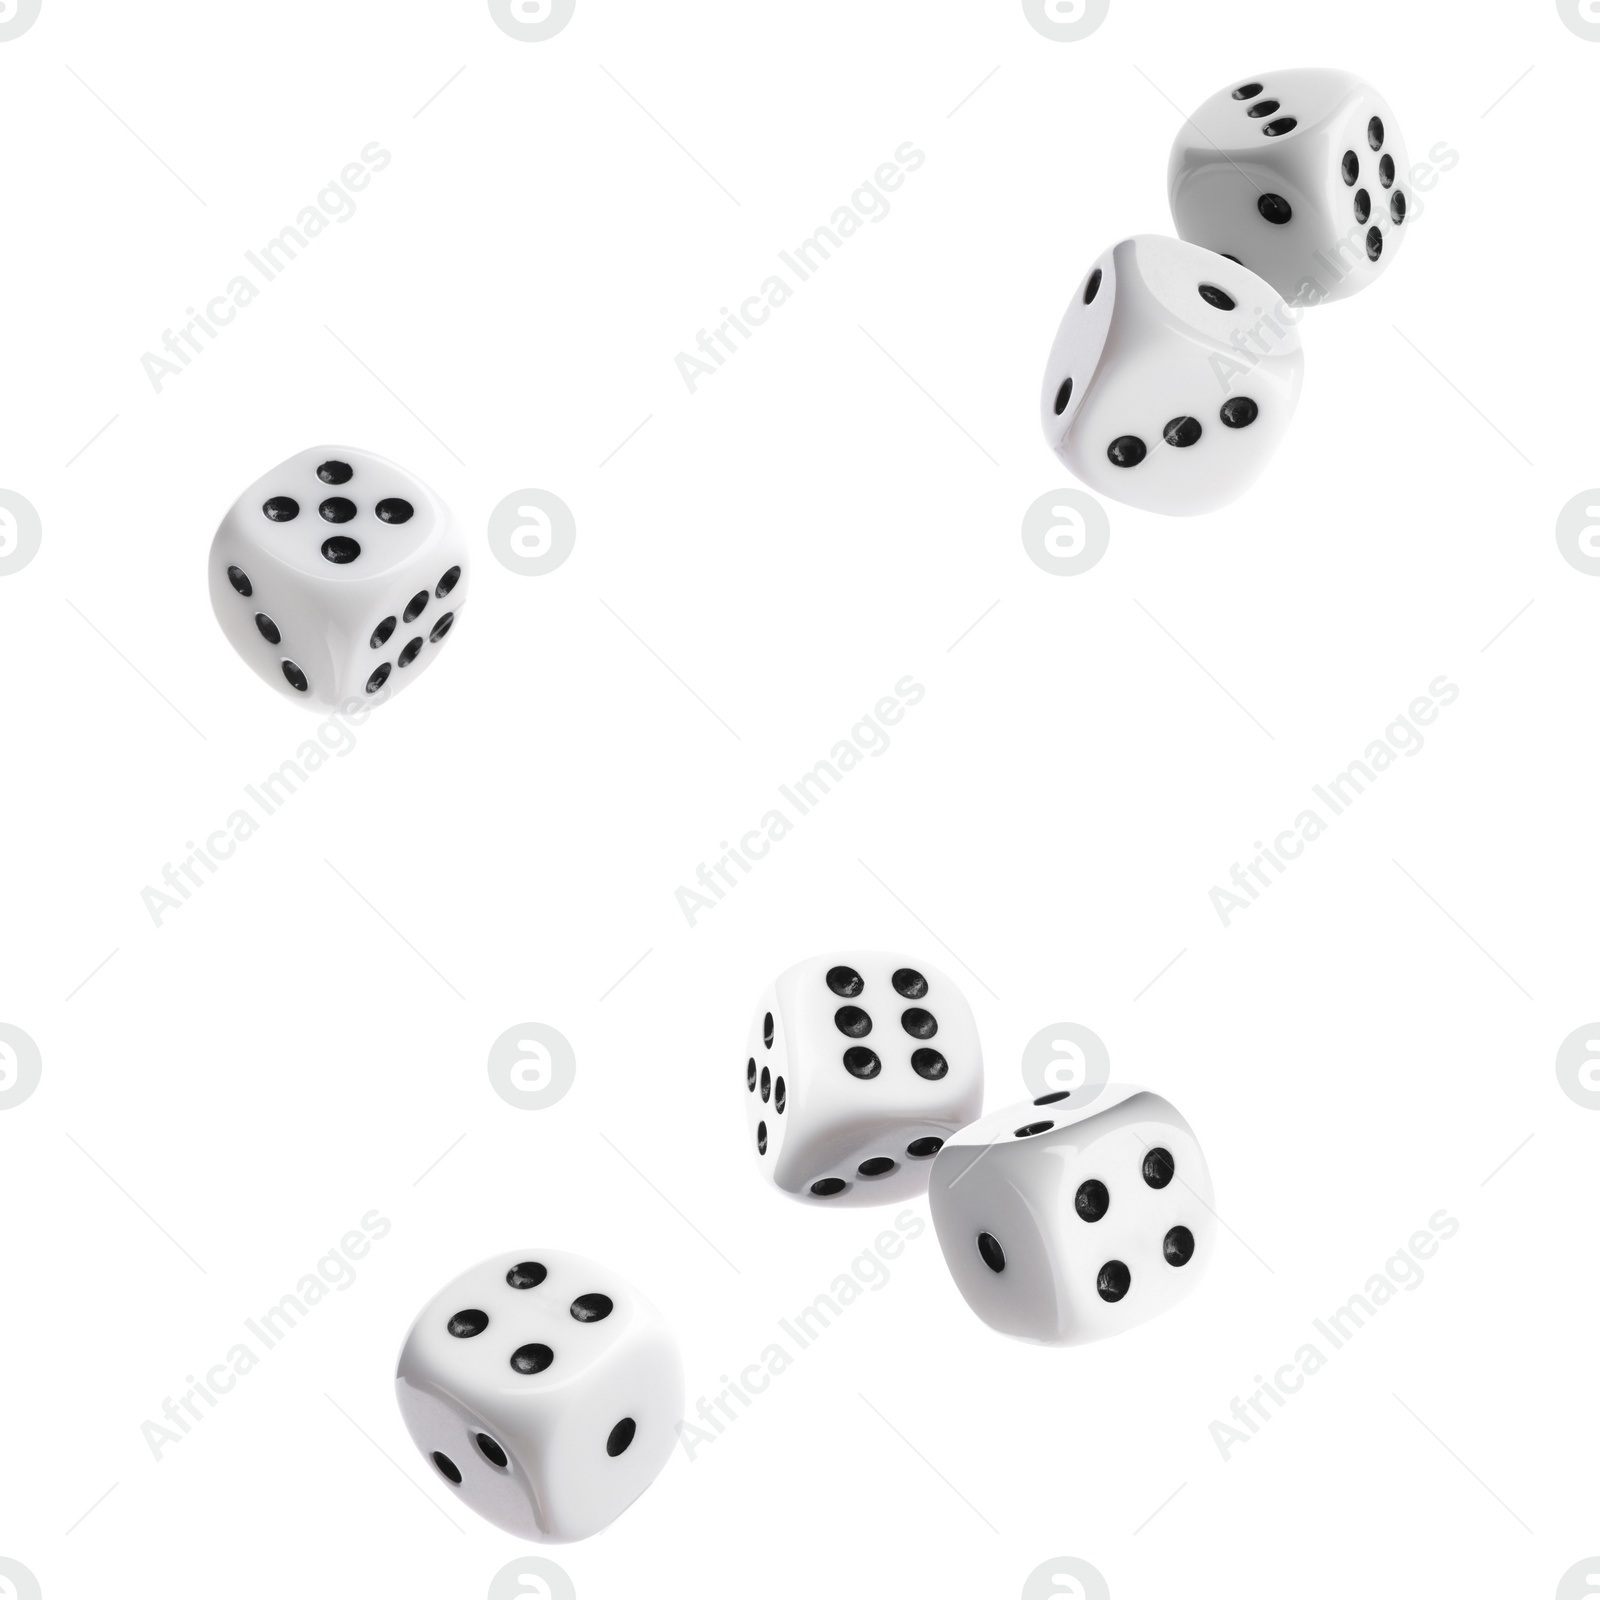 Image of Six dice in air on white background